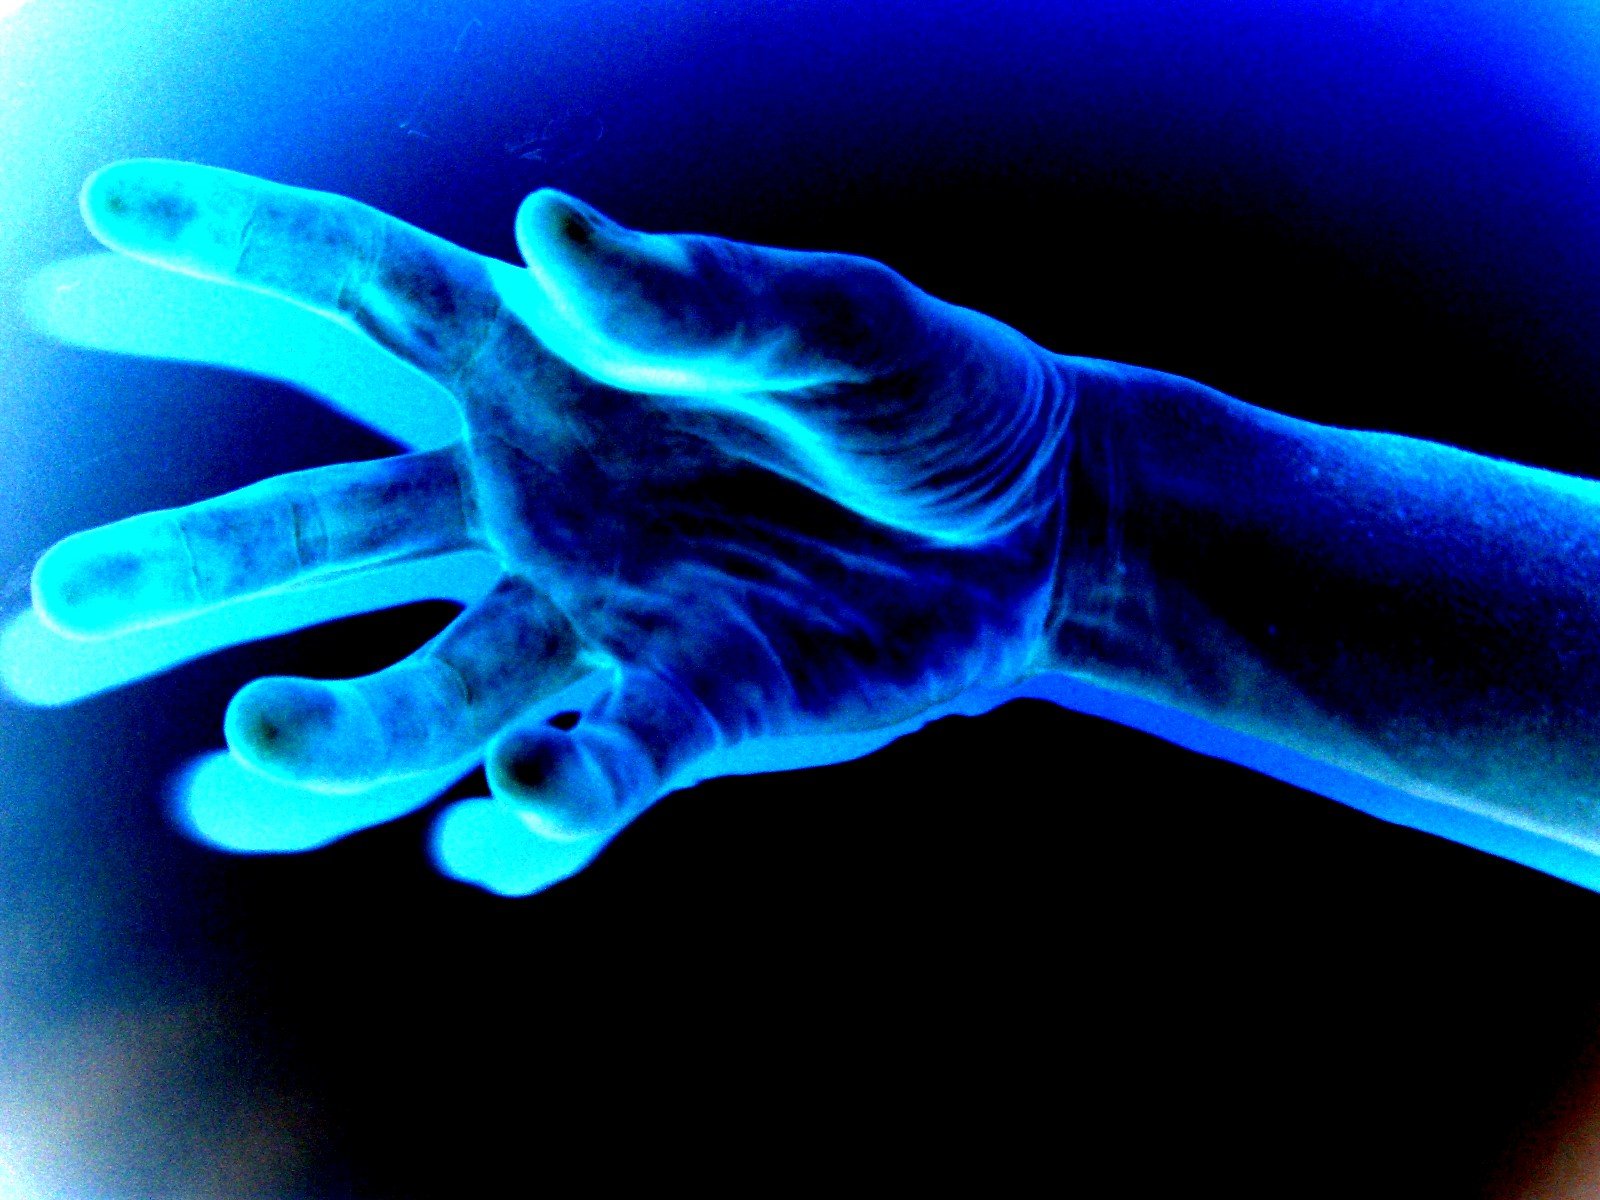 a hand reaching up towards soing blue and green